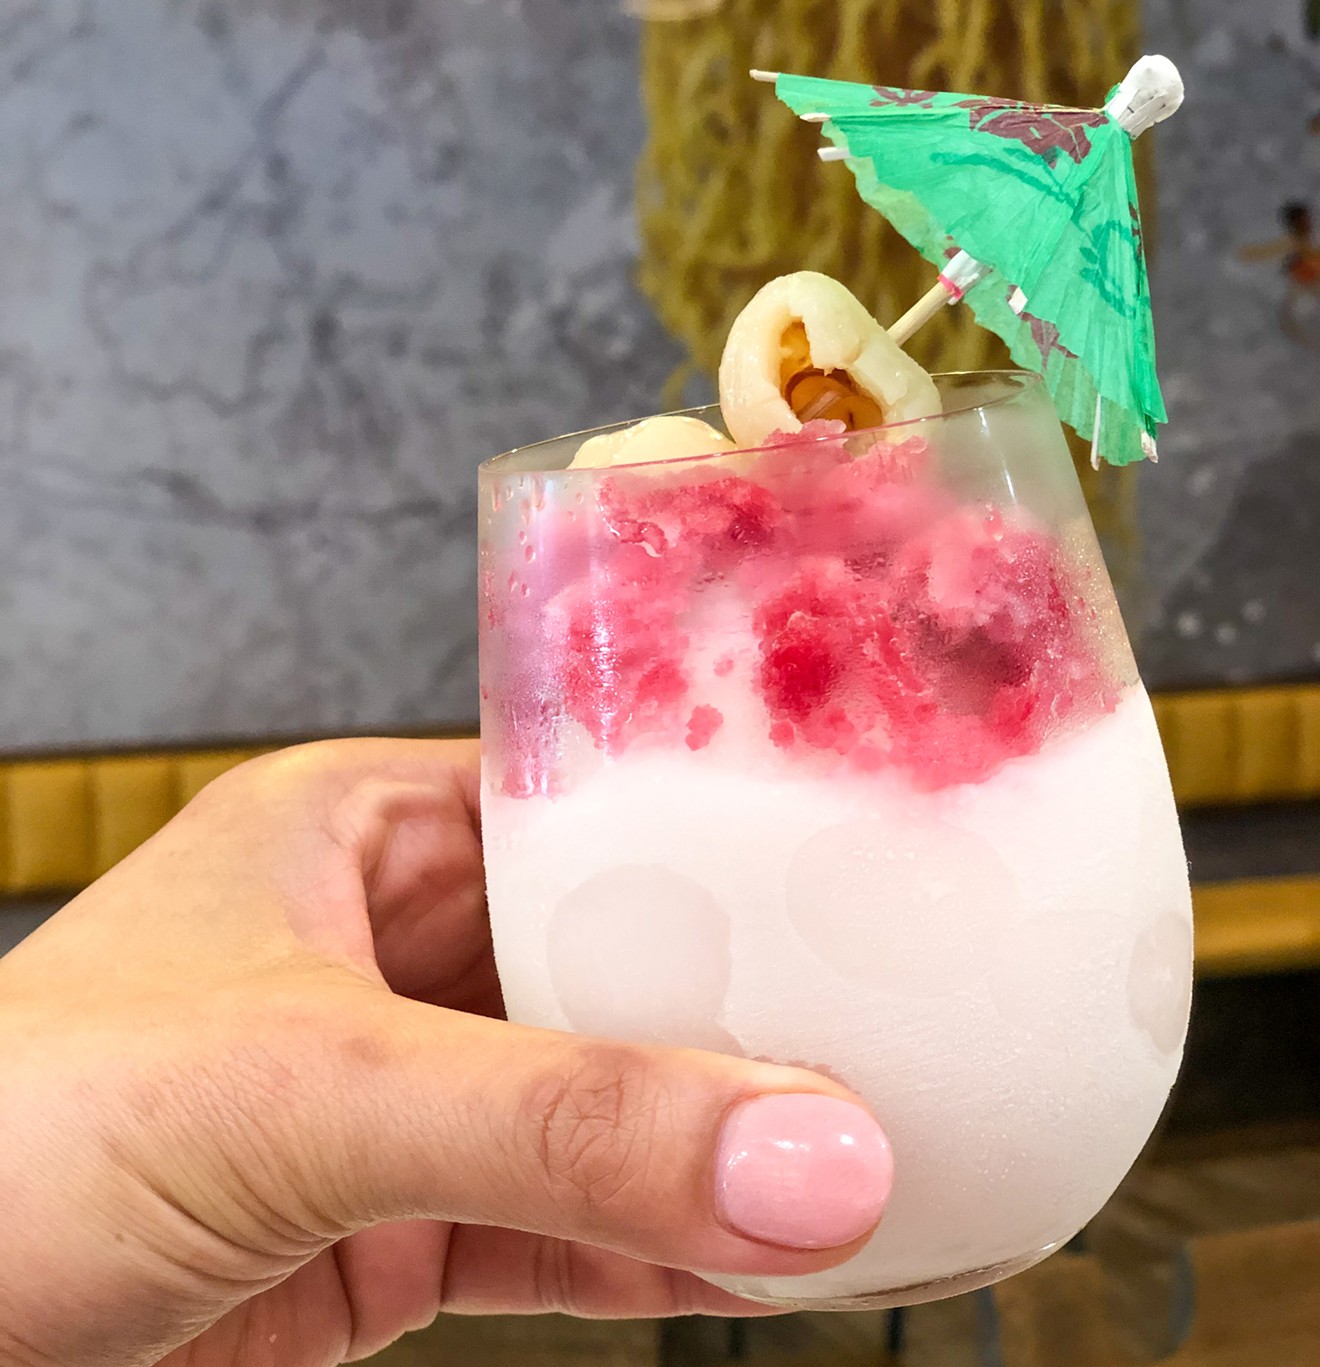 The Pinkies Up cocktail is just the lychee-hibiscus-peach drink we need today.